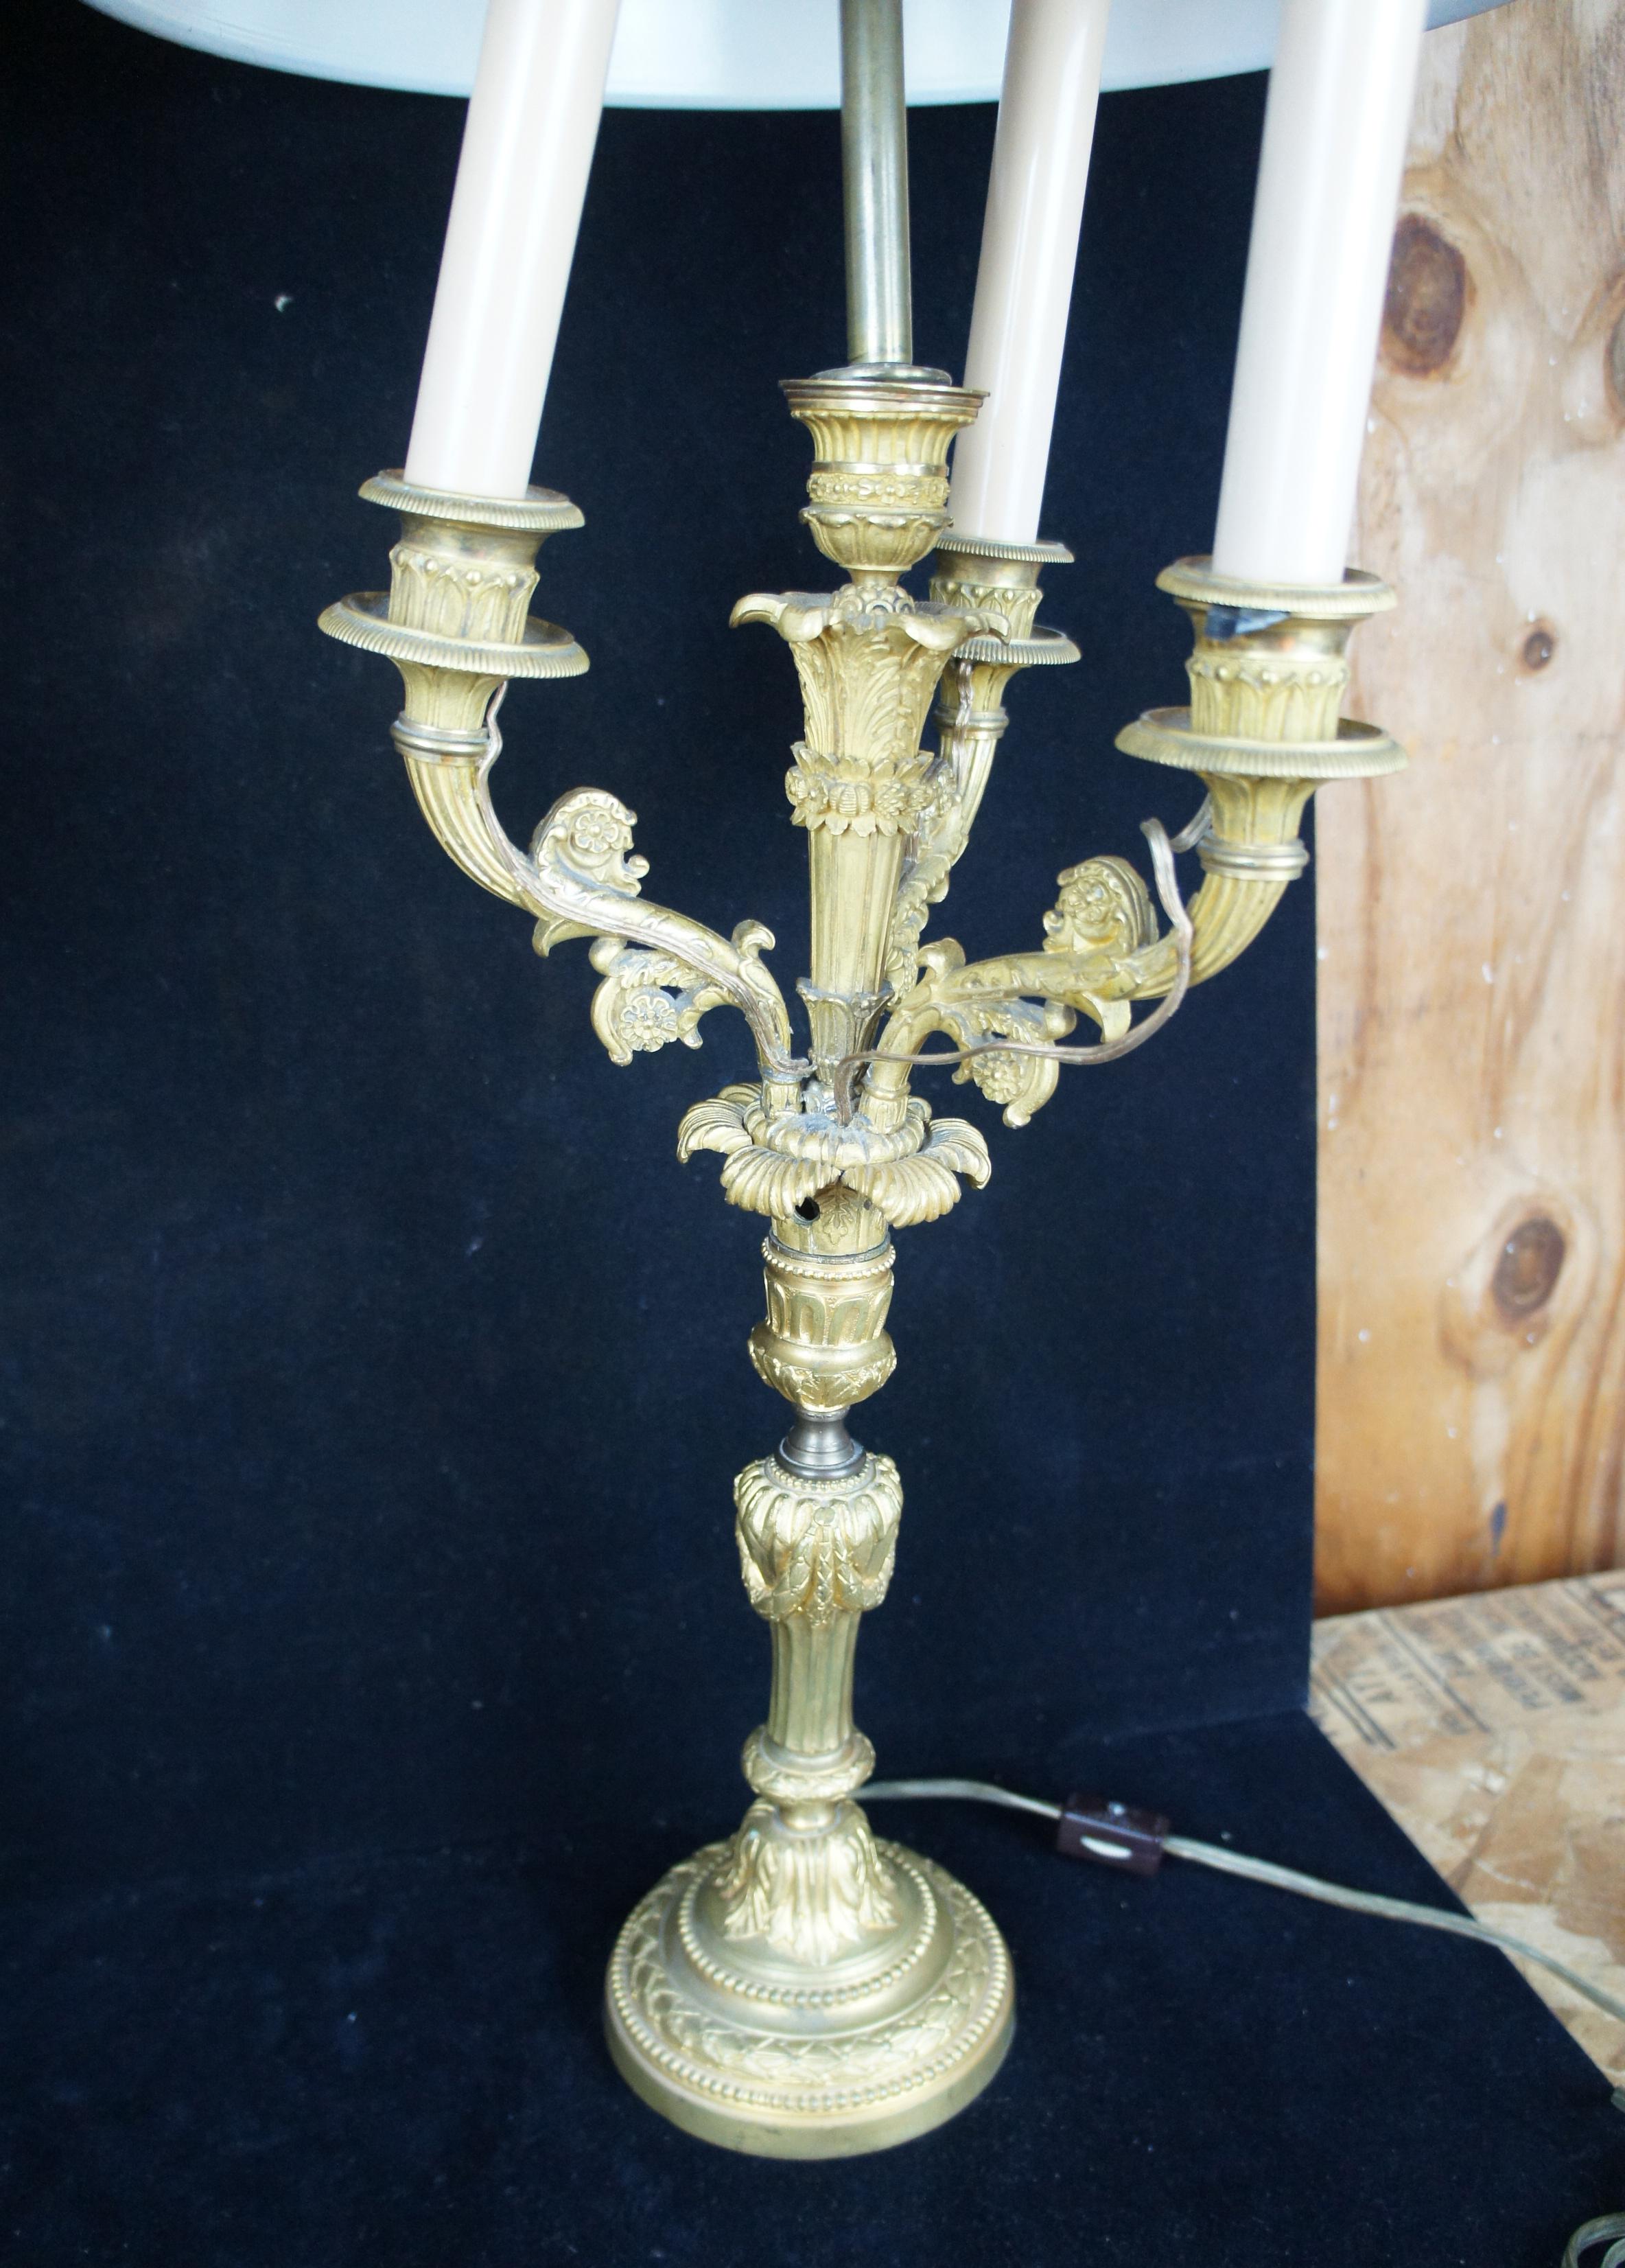 2 Antique French Gilt 5 Arm Candelabra Candle Stick Bouillotte Lamps Tole Shade 3